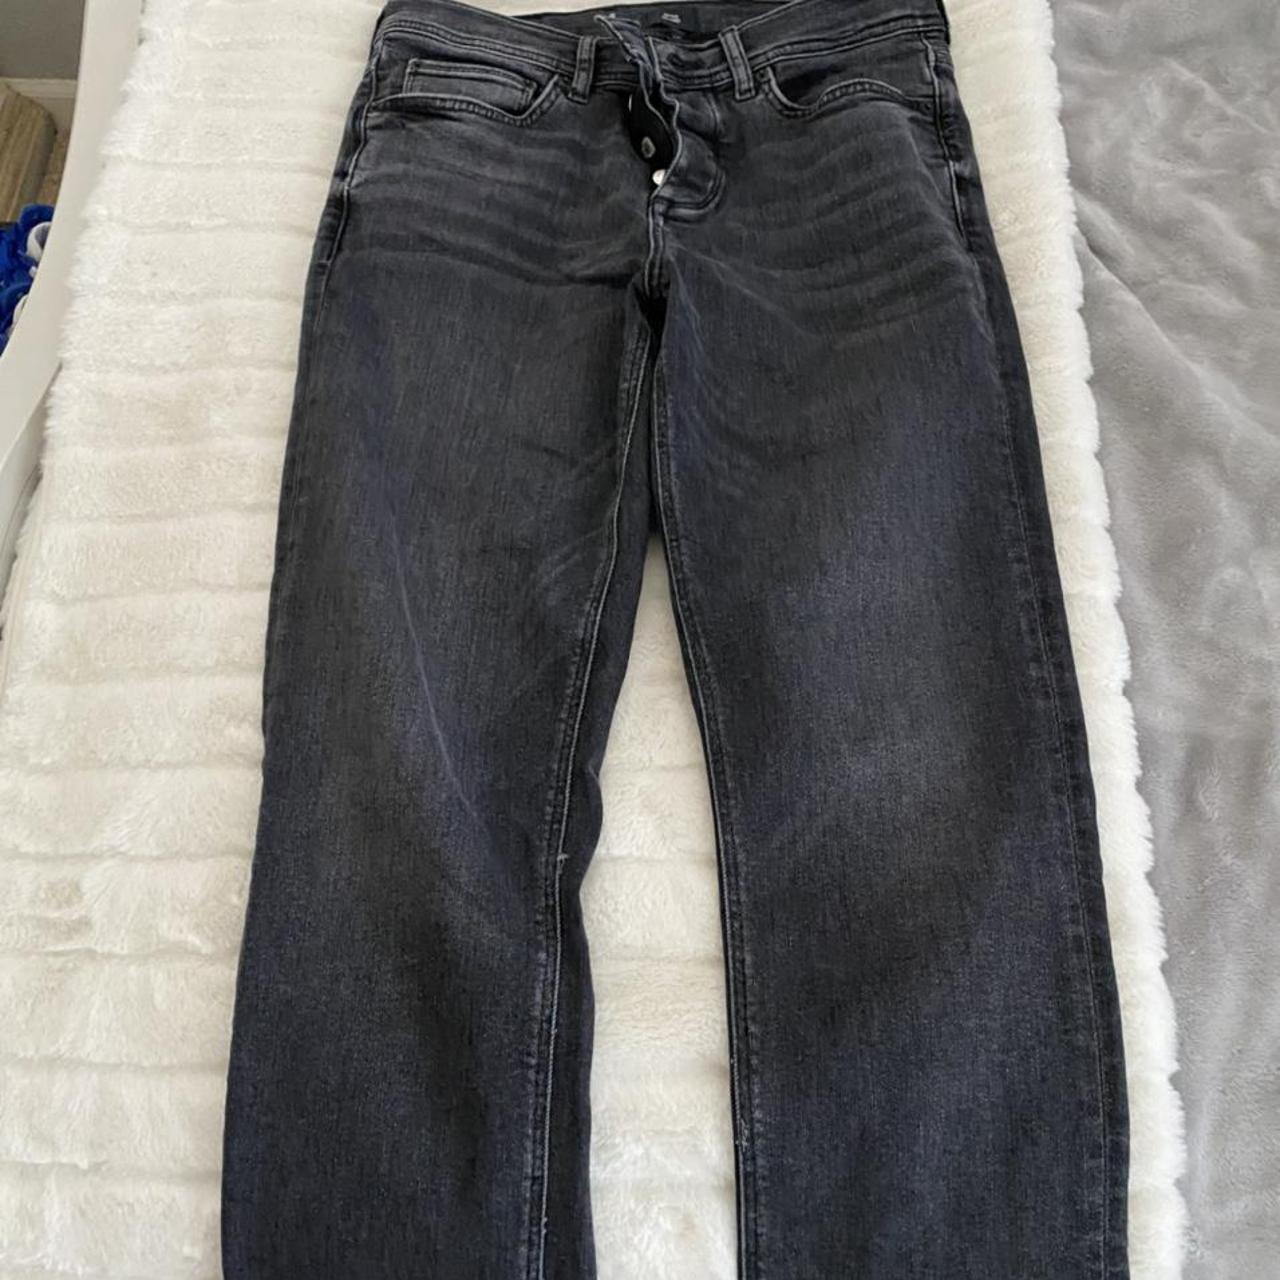 River Island Men's Black and Grey Jeans (3)